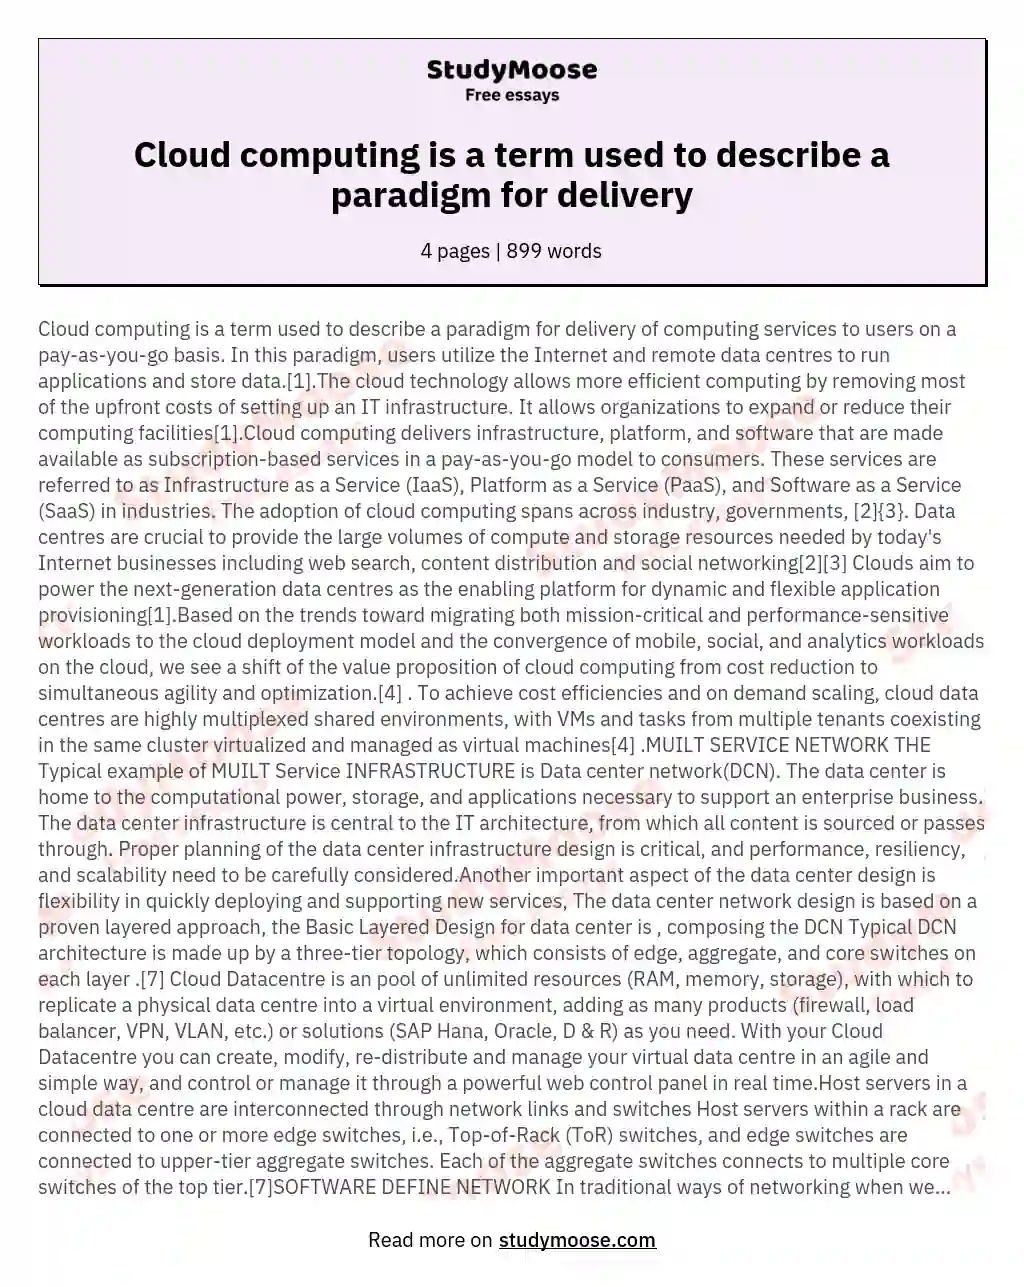 Cloud computing is a term used to describe a paradigm for delivery essay